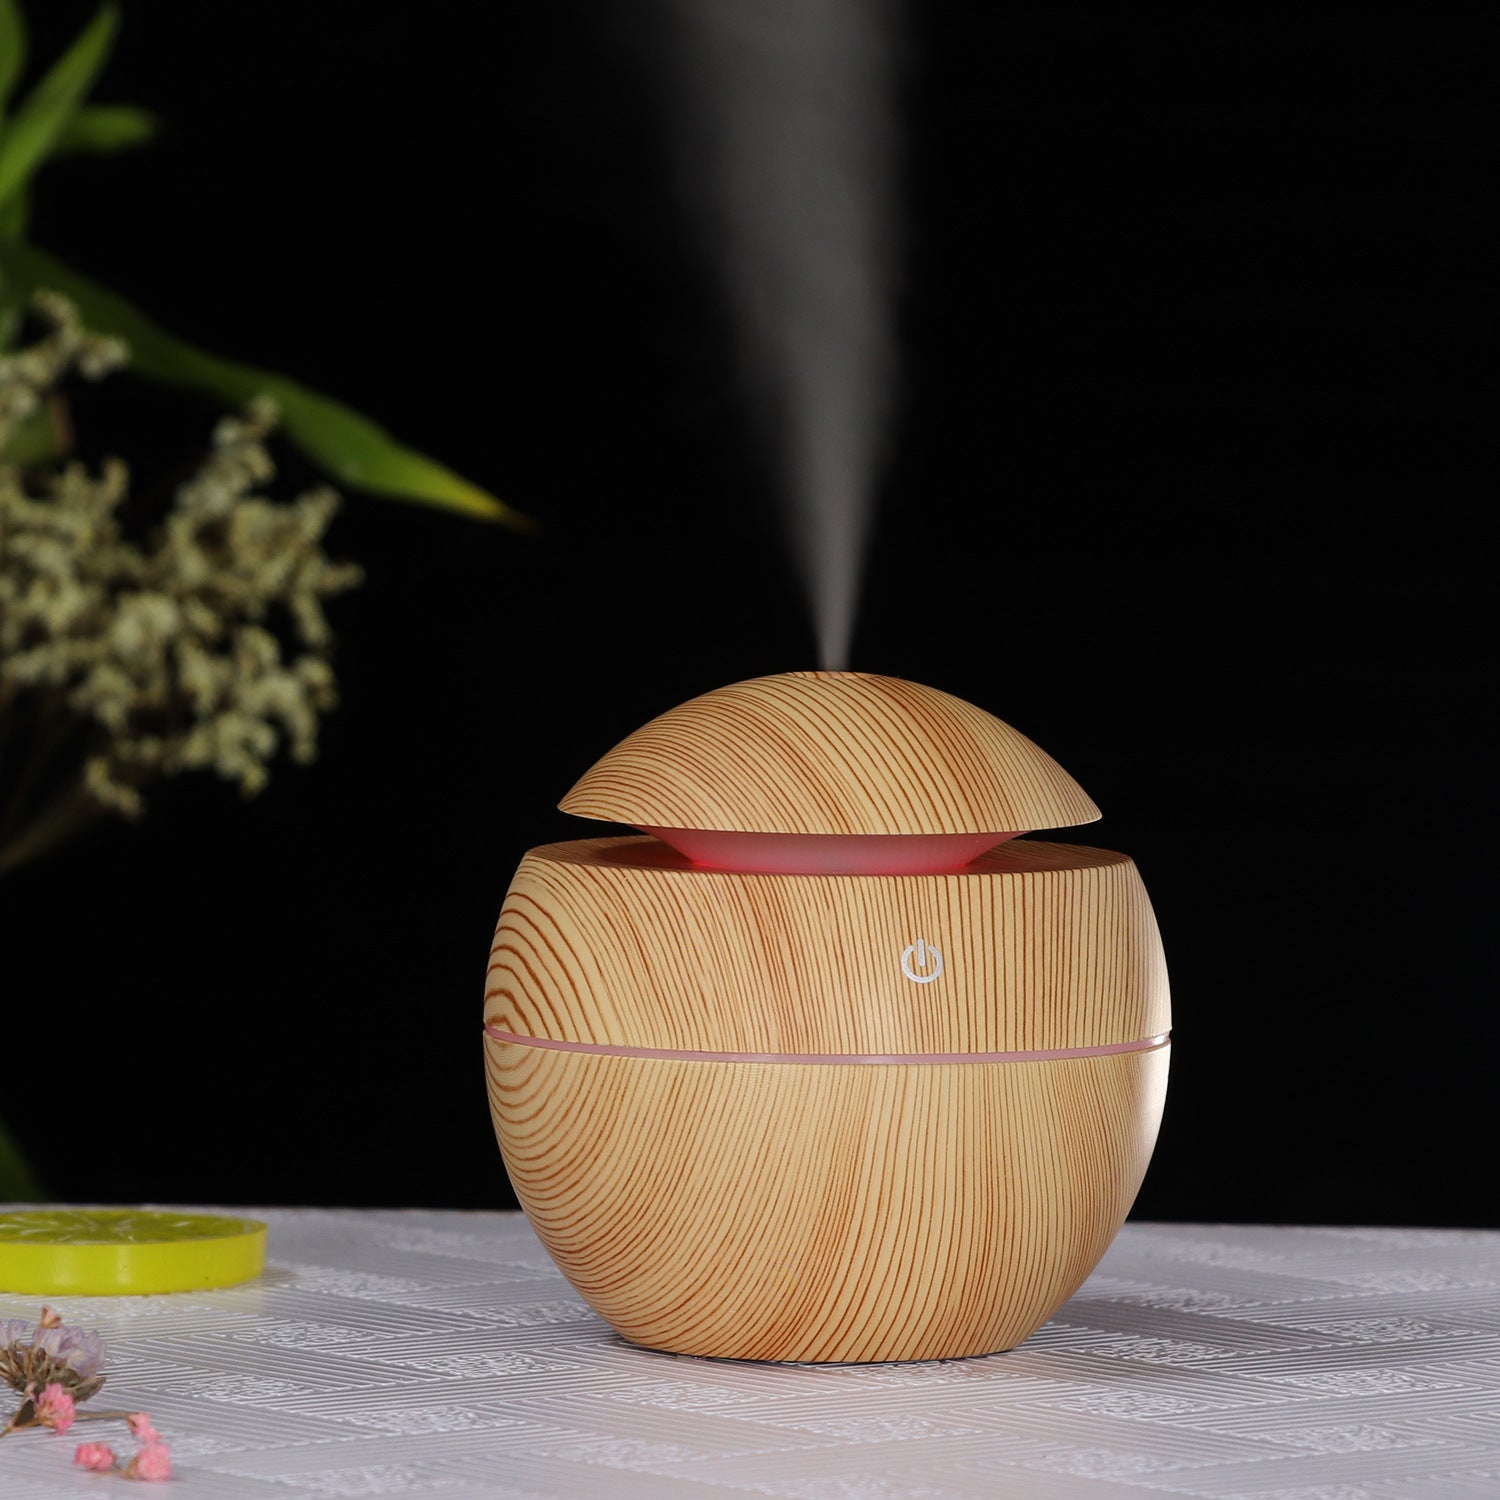 MOLOO-Aroma-Difusser-Hout-Luchtbevochtiger-luchtverfrisser-Aroma-therapie-LED-USB